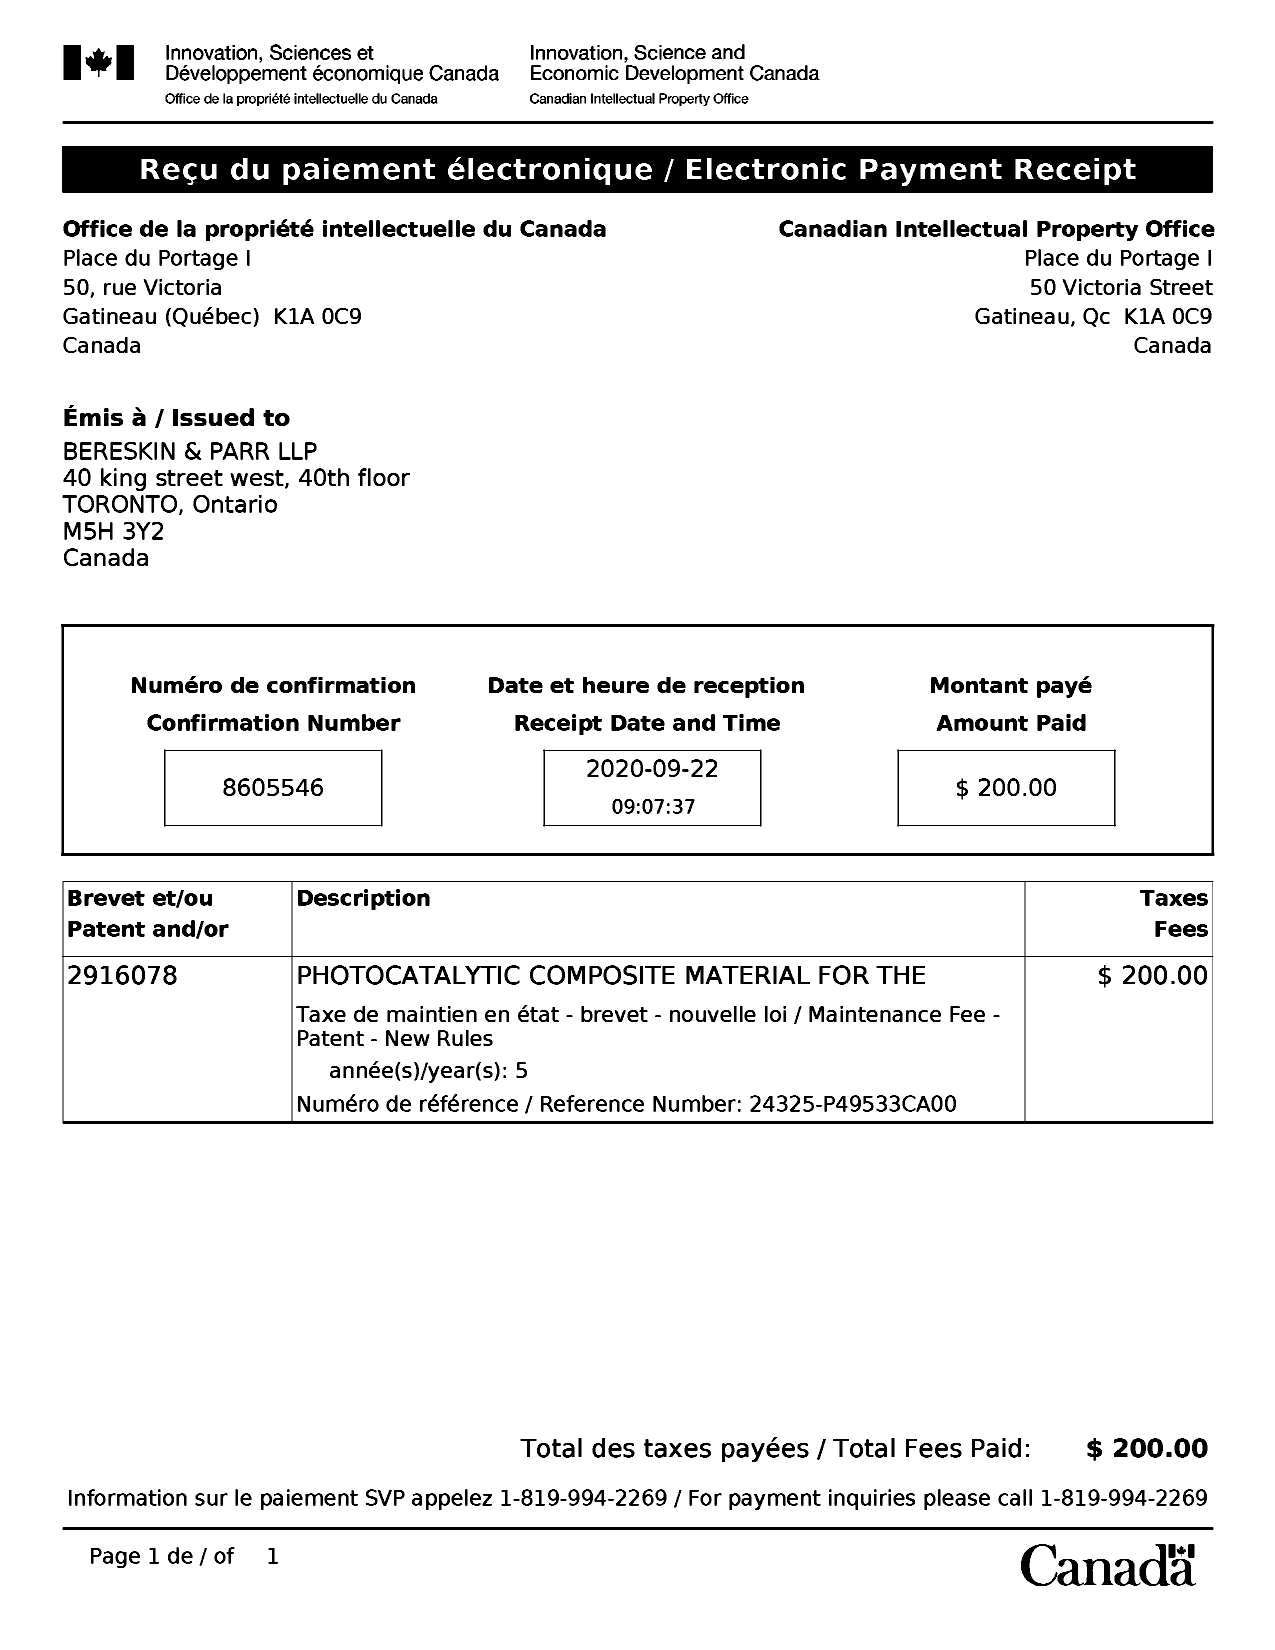 Canadian Patent Document 2916078. Maintenance Fee Payment 20200922. Image 1 of 1